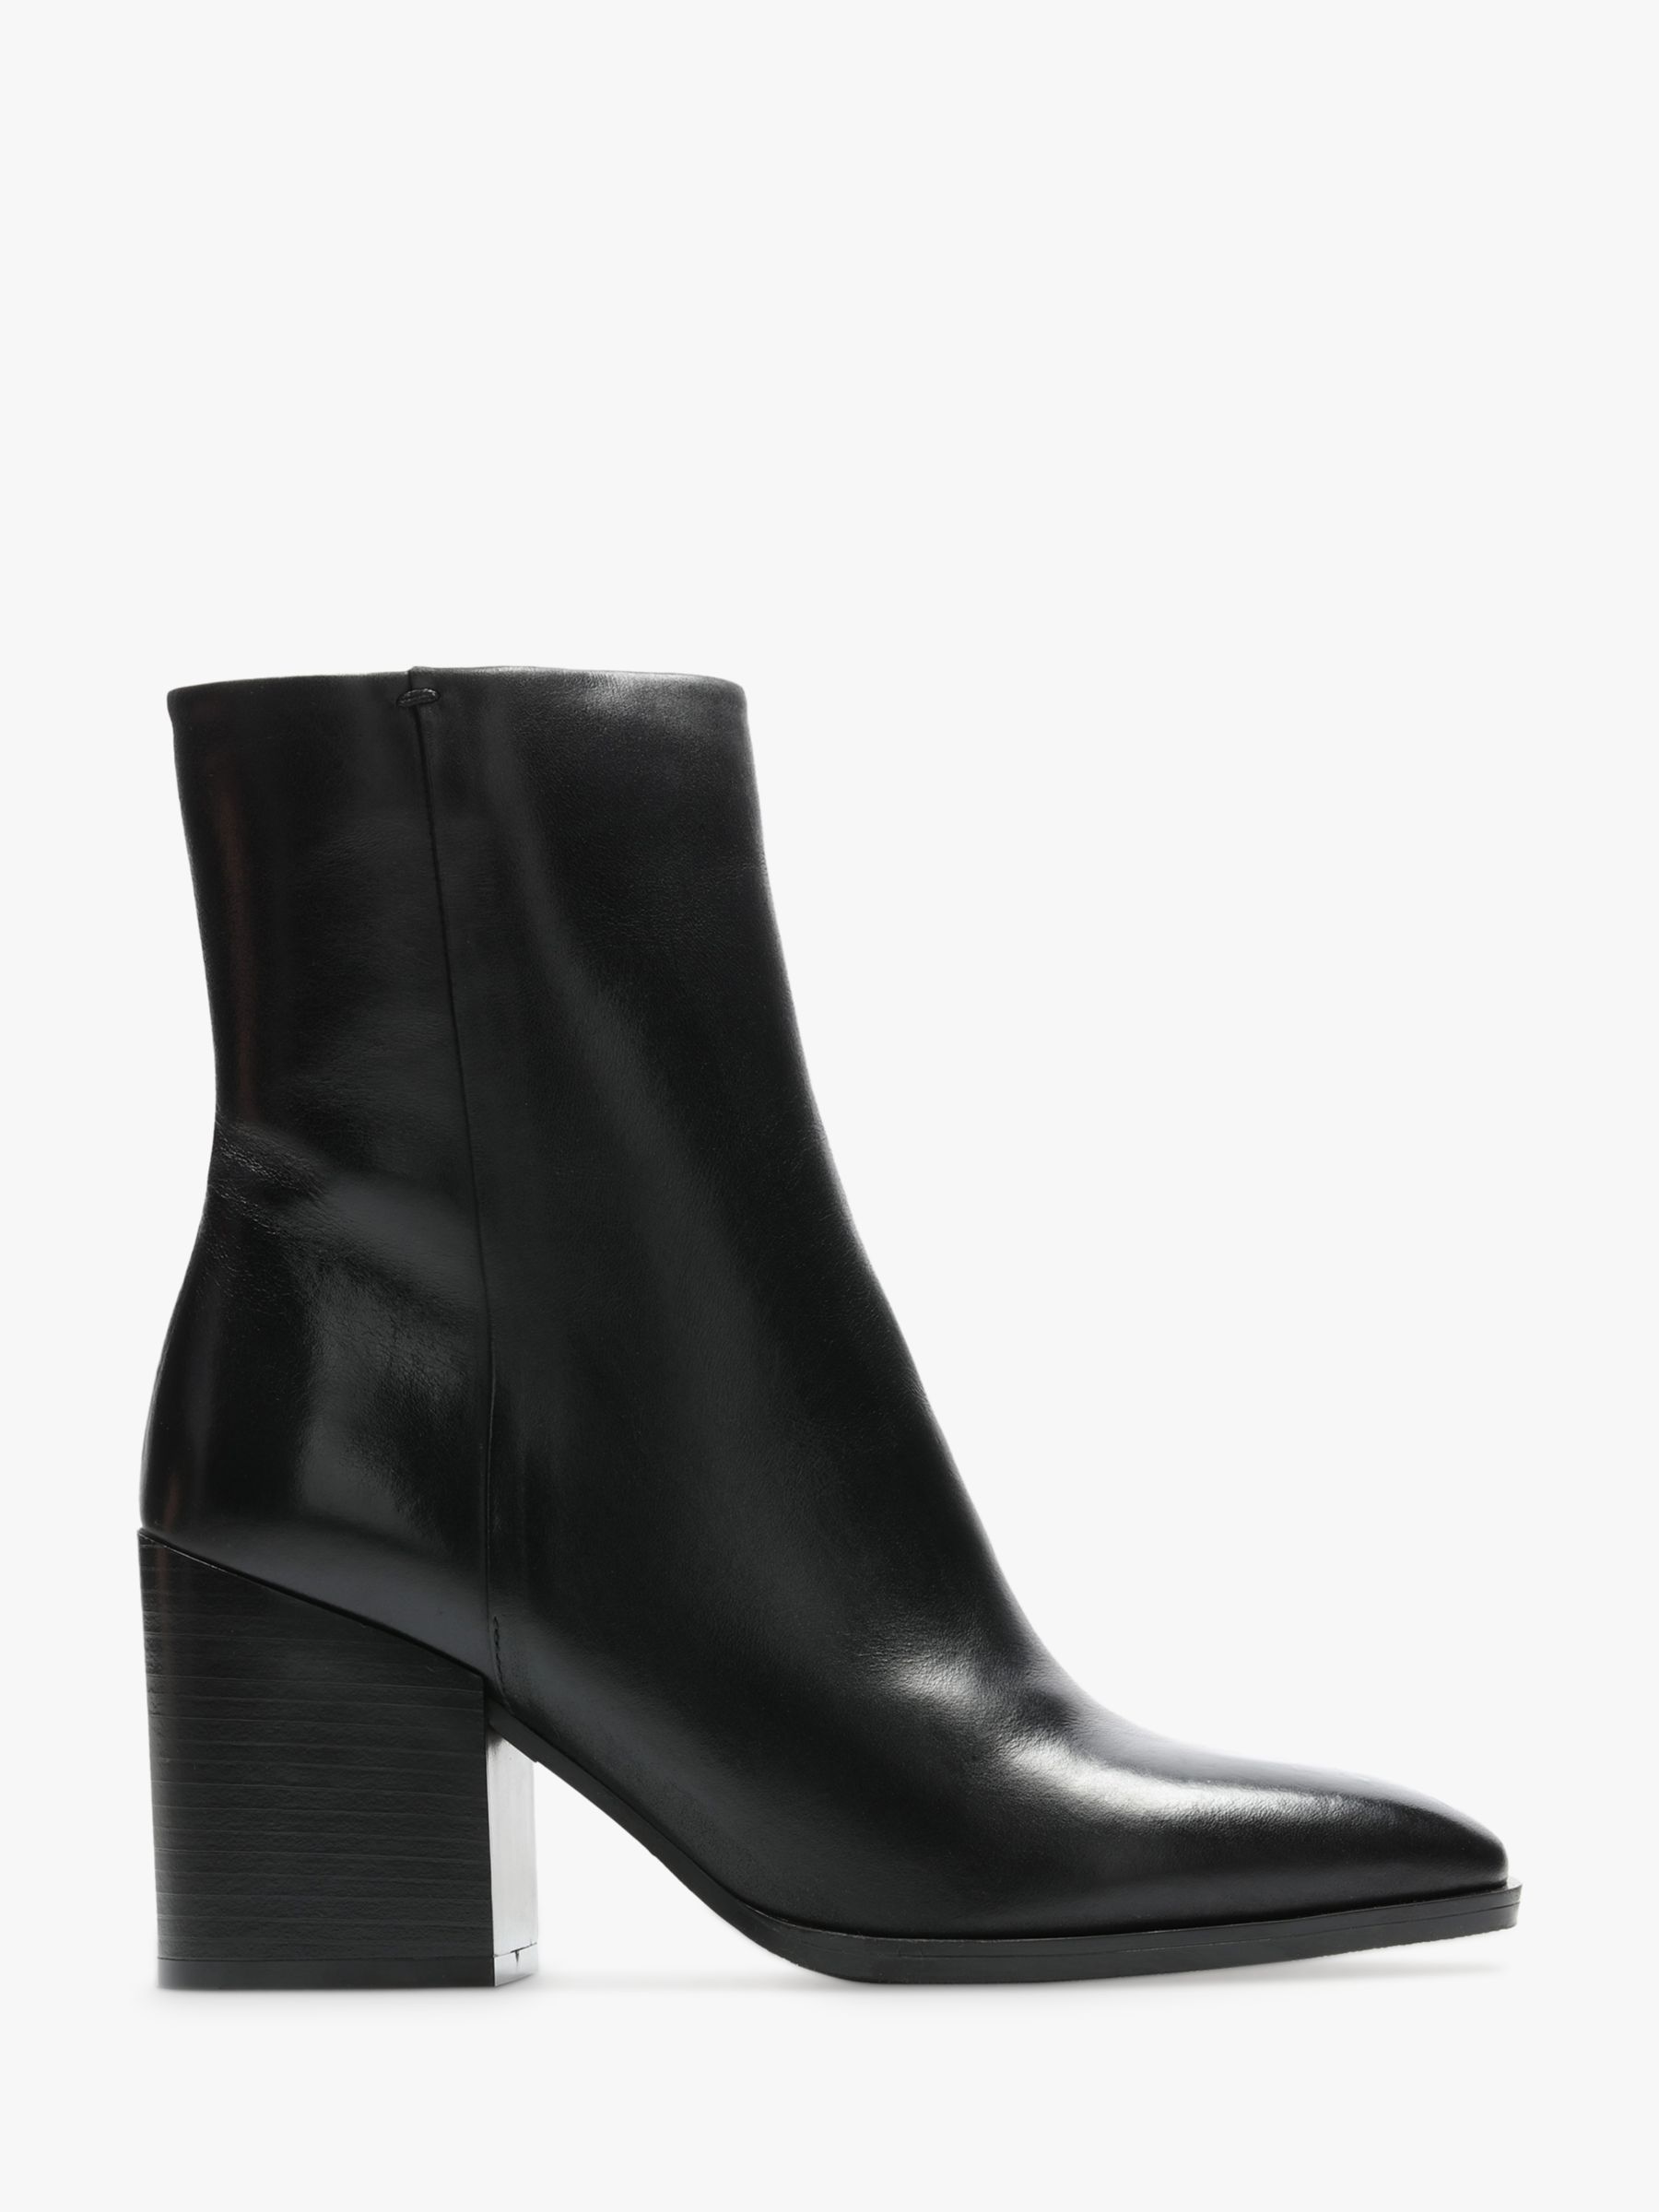 Clarks Lydia Mid Leather Stacked Heel Ankle Boots, Black at John Lewis ...